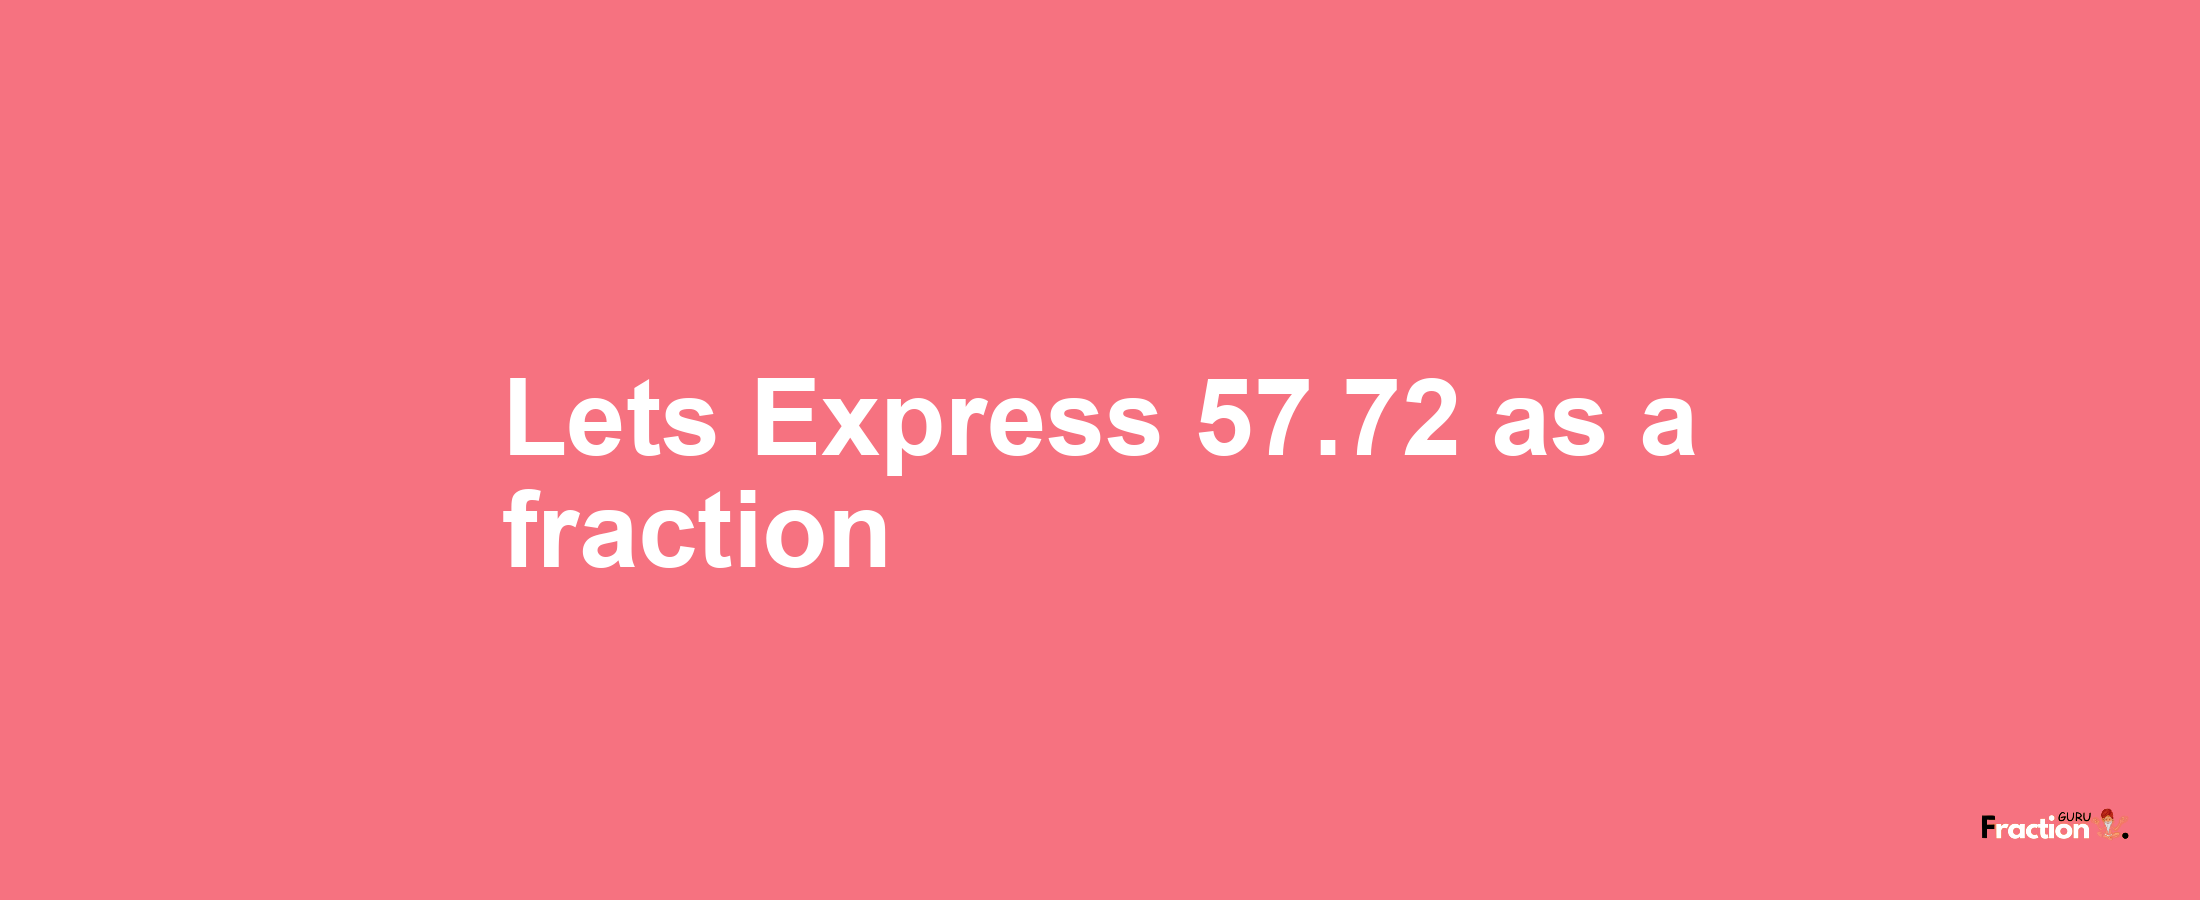 Lets Express 57.72 as afraction